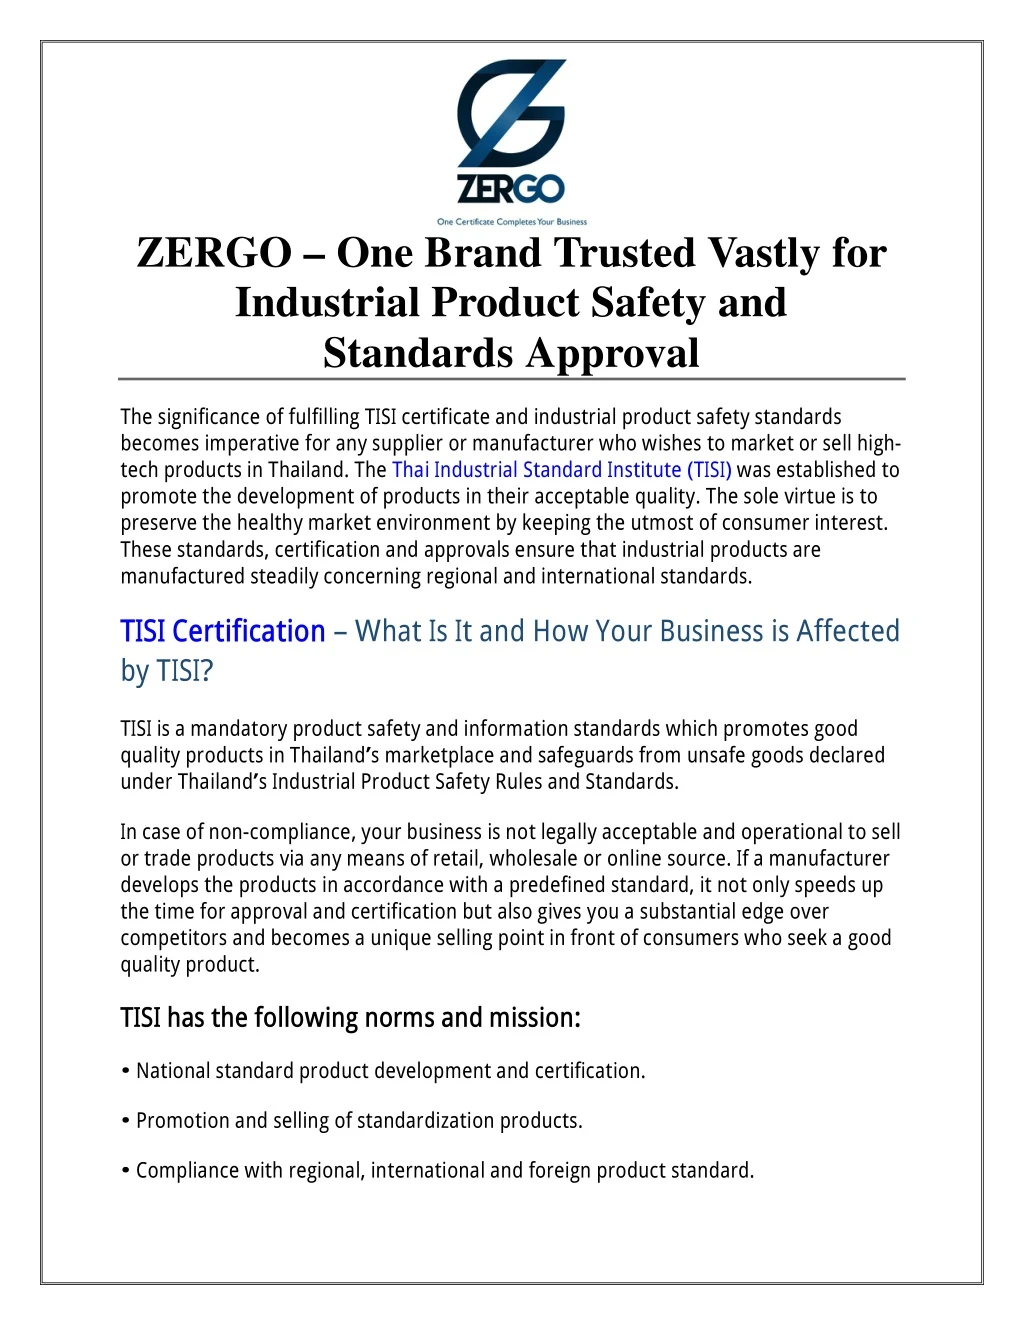 zergo one brand trusted vastly for industrial